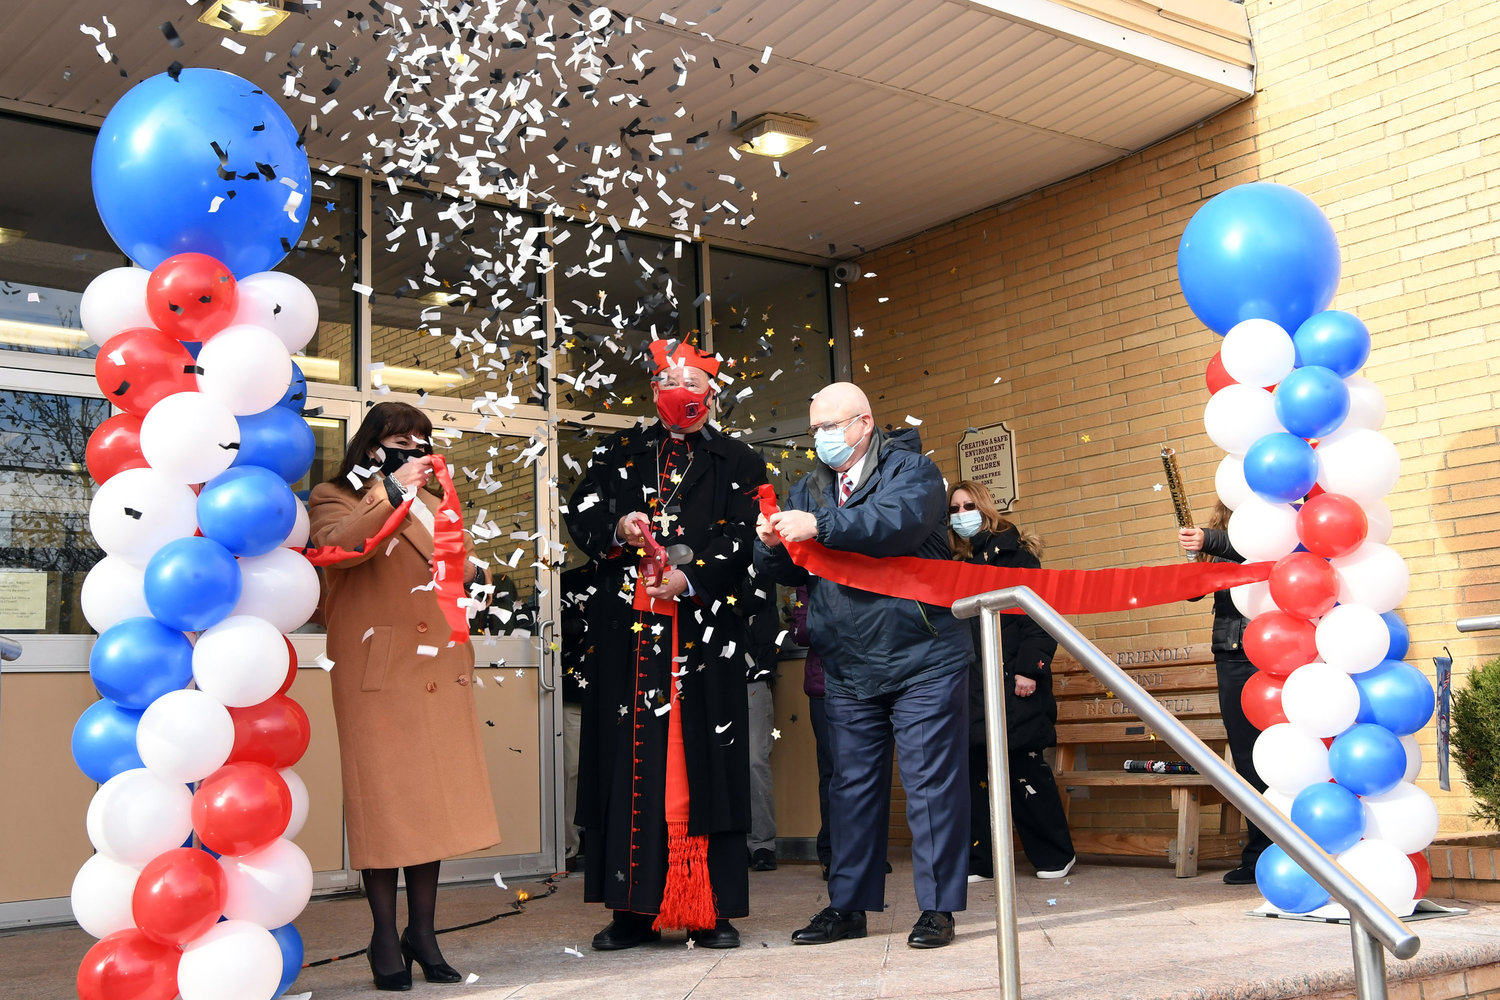 Cardinal Dolan cuts the ribbon at the dedication, assisted by Zoilita Herrera, regional superintendent of Staten Island Catholic schools, left, and Michael Deegan, superintendent of schools in the archdiocese, right.